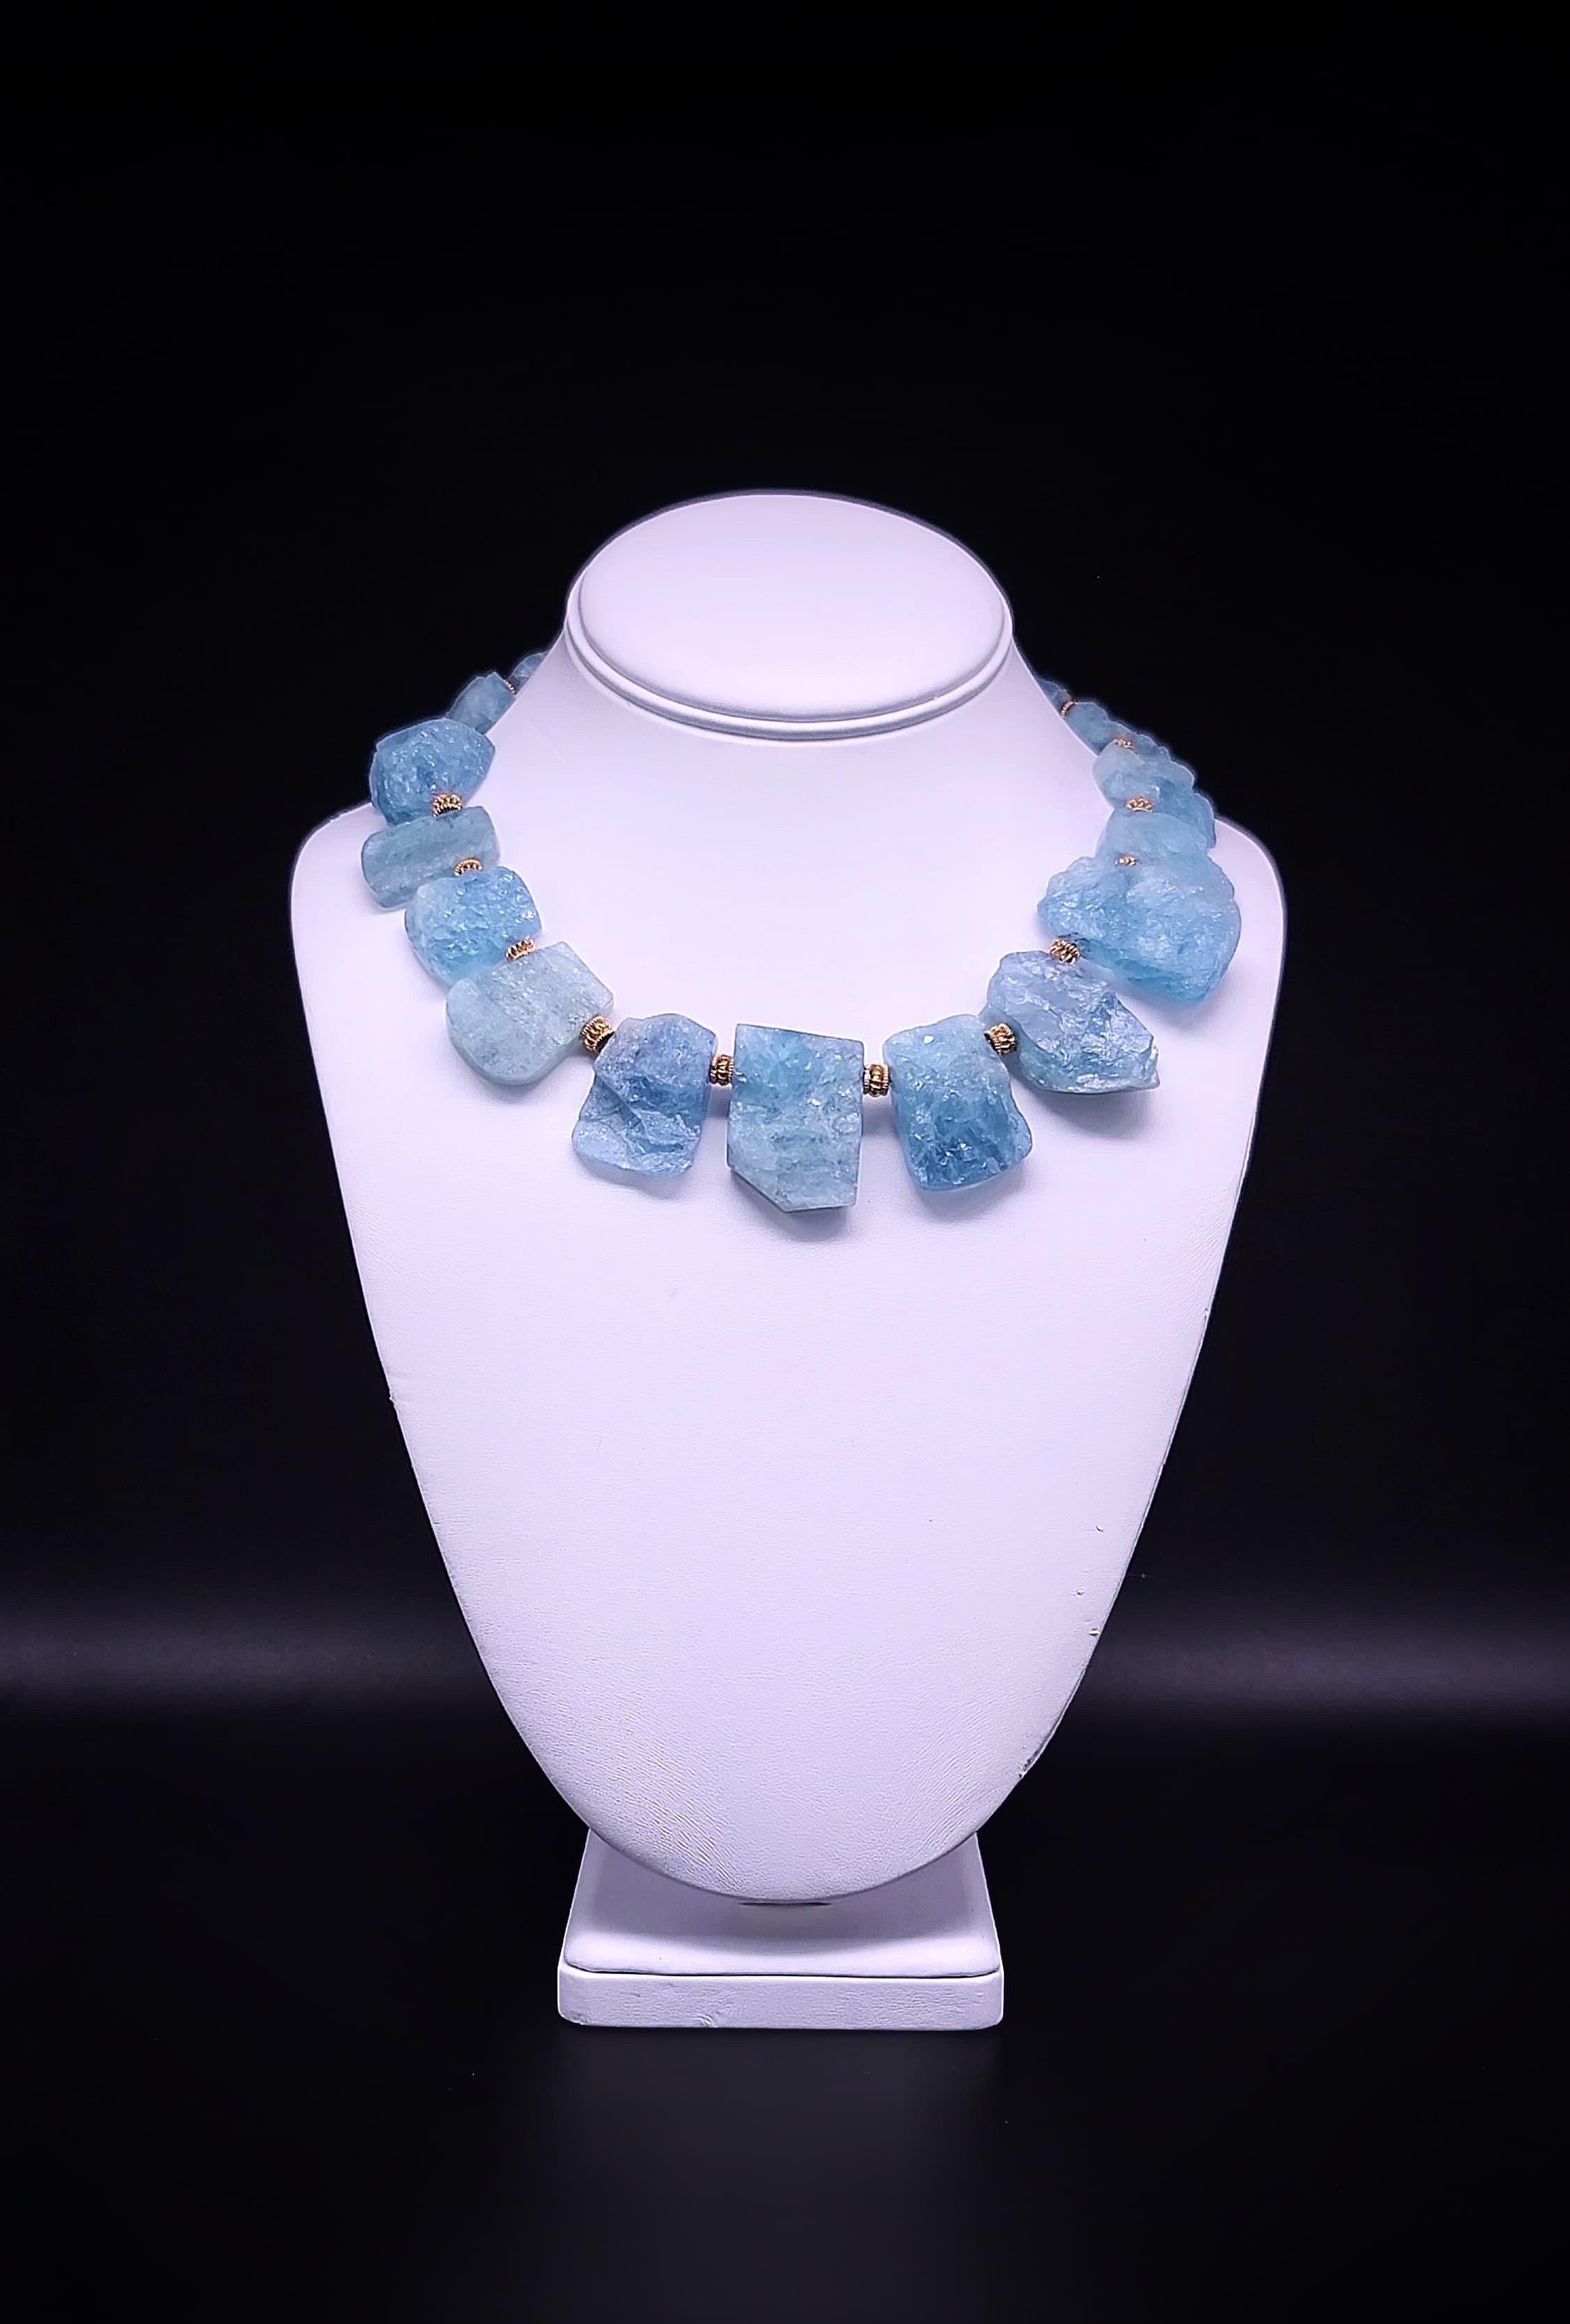 One-of-a-Kind

Richly colored Natural Aquamarine makes up this collar of rough-cut plates that surround the neck “ just so.”. The carefully matched plates are rough on the front side to capture the light and reflect it to make the presentation most